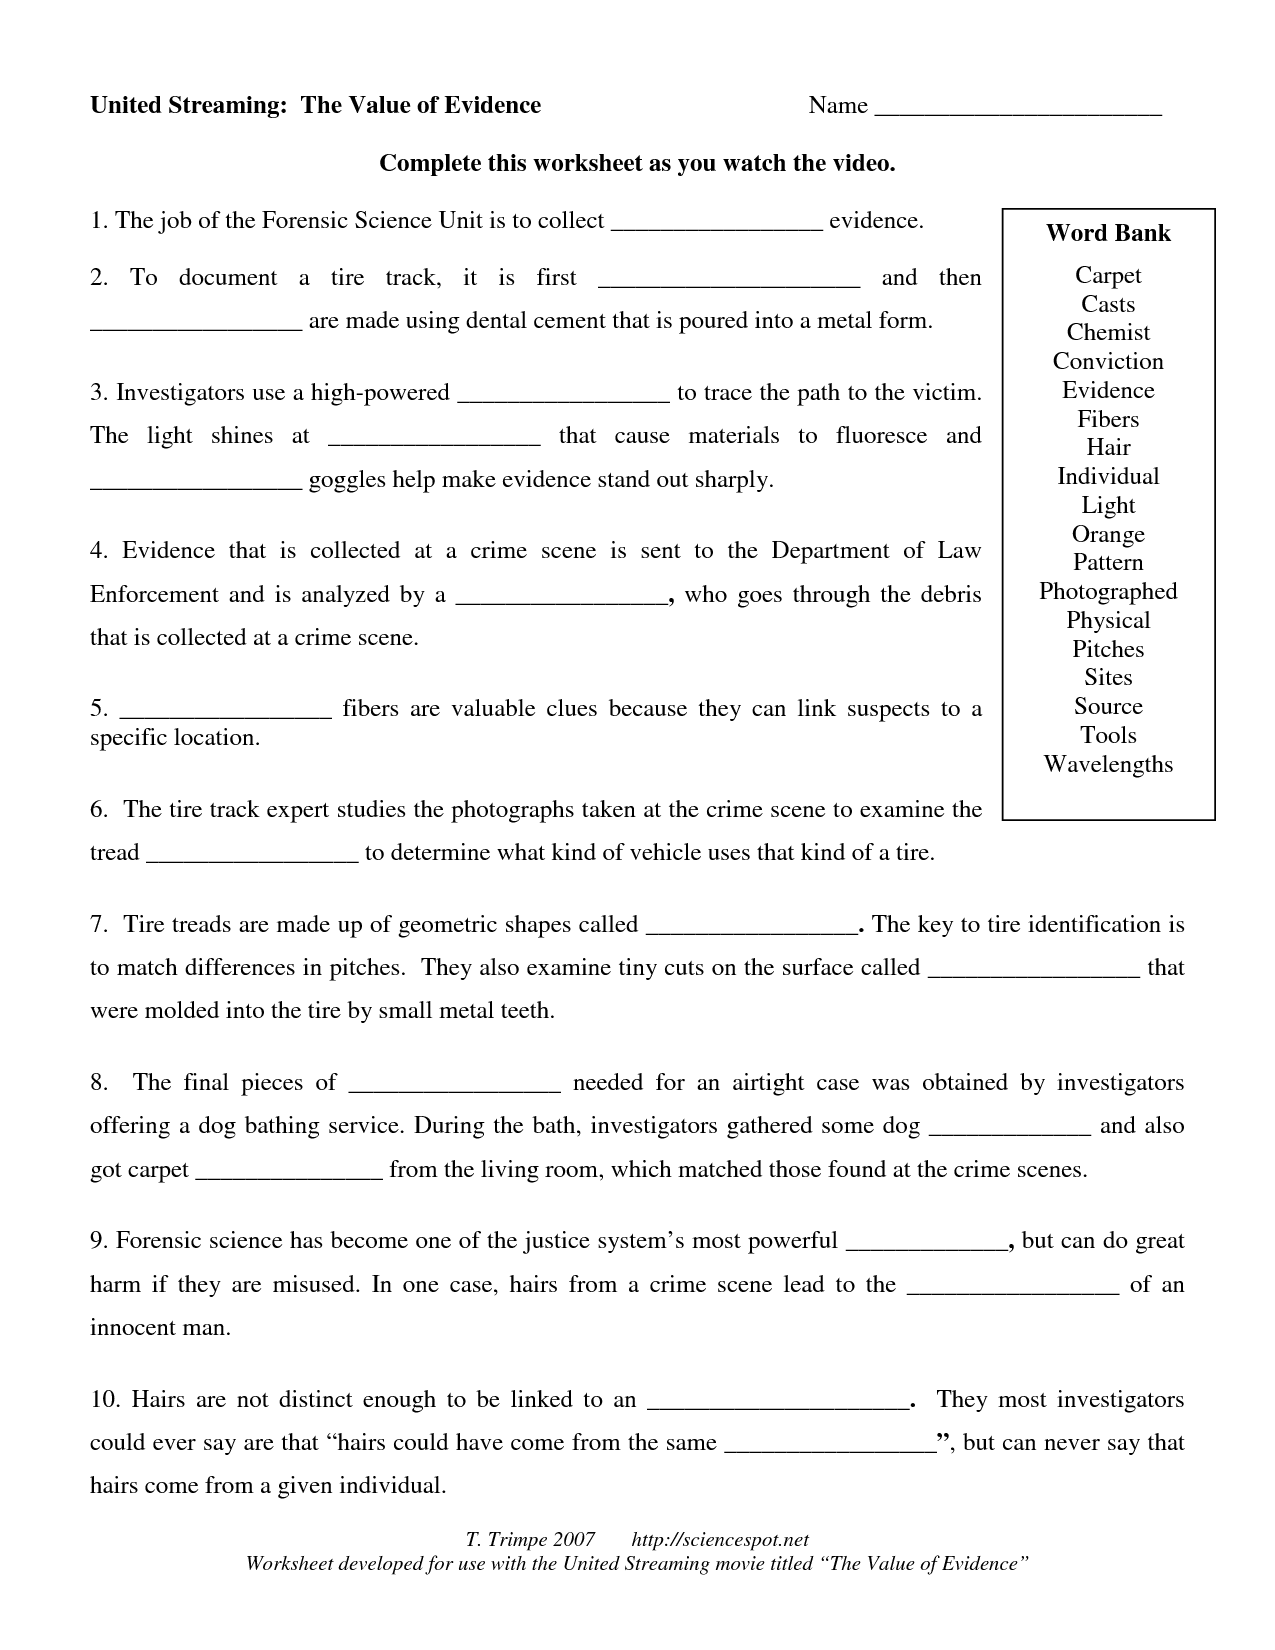 8-best-images-of-chemistry-review-worksheets-periodic-table-worksheet-answers-organic